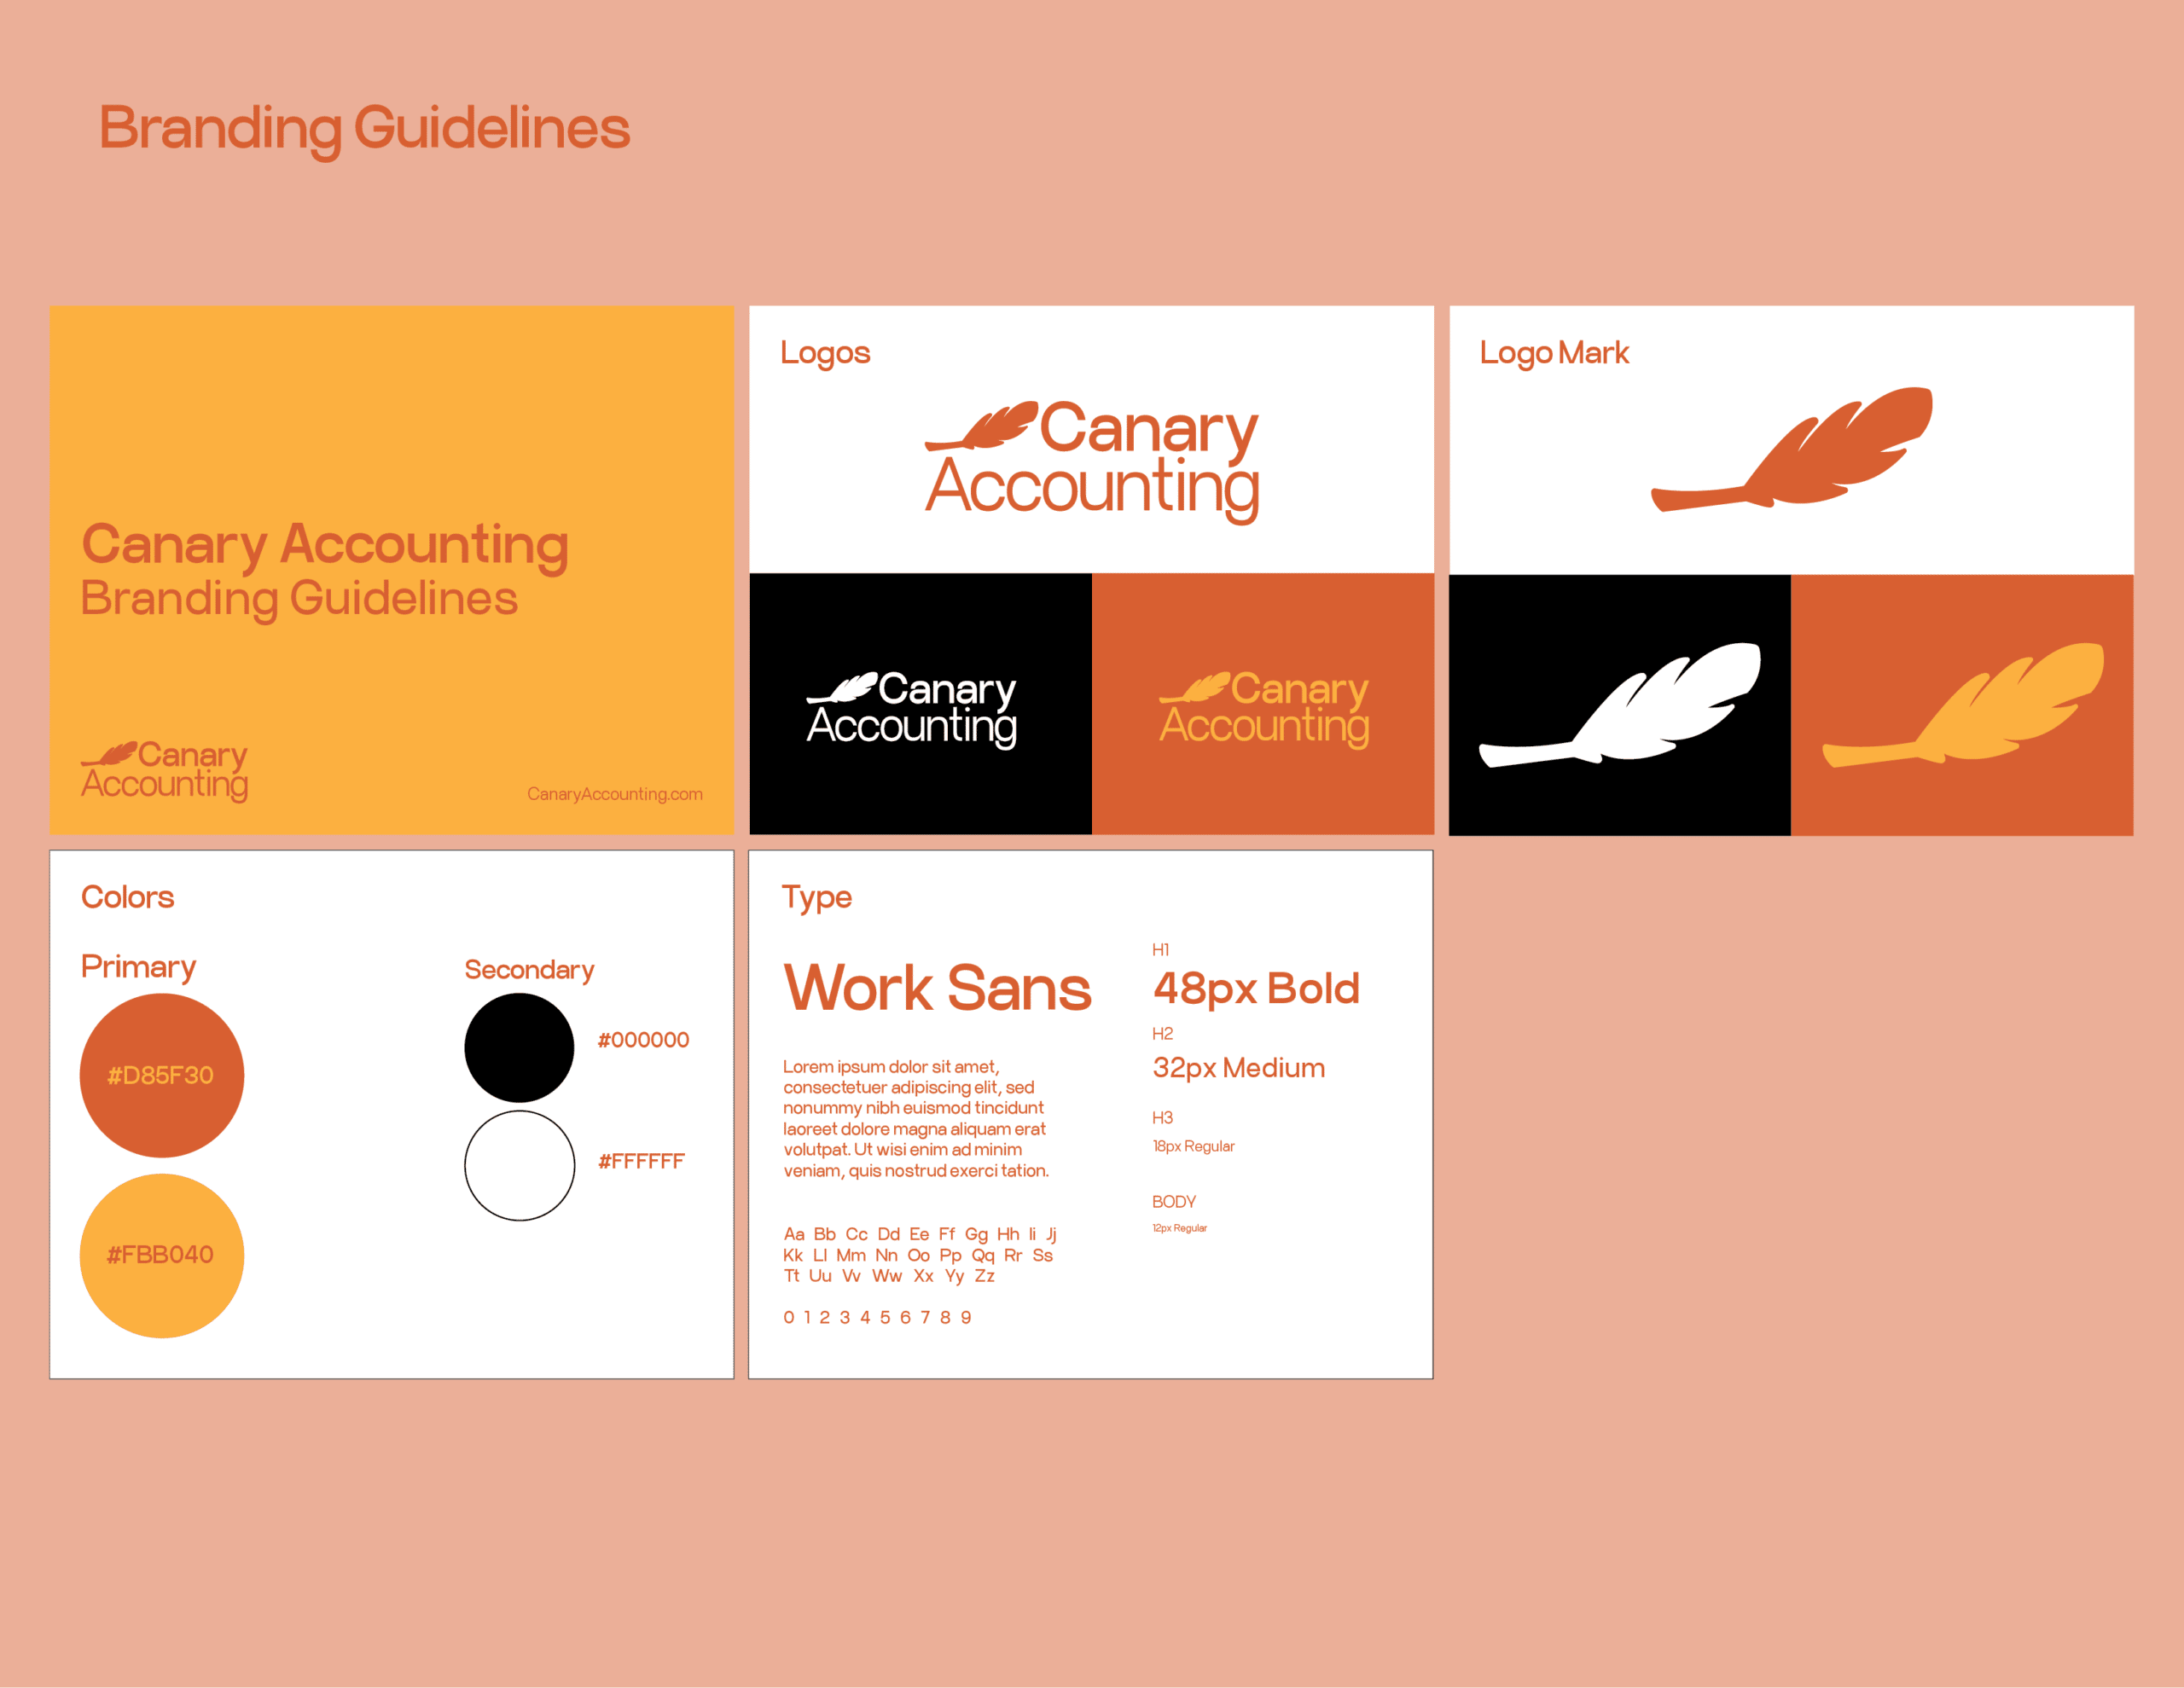 03 - CANARYACC_BRAND_GUIDELINES